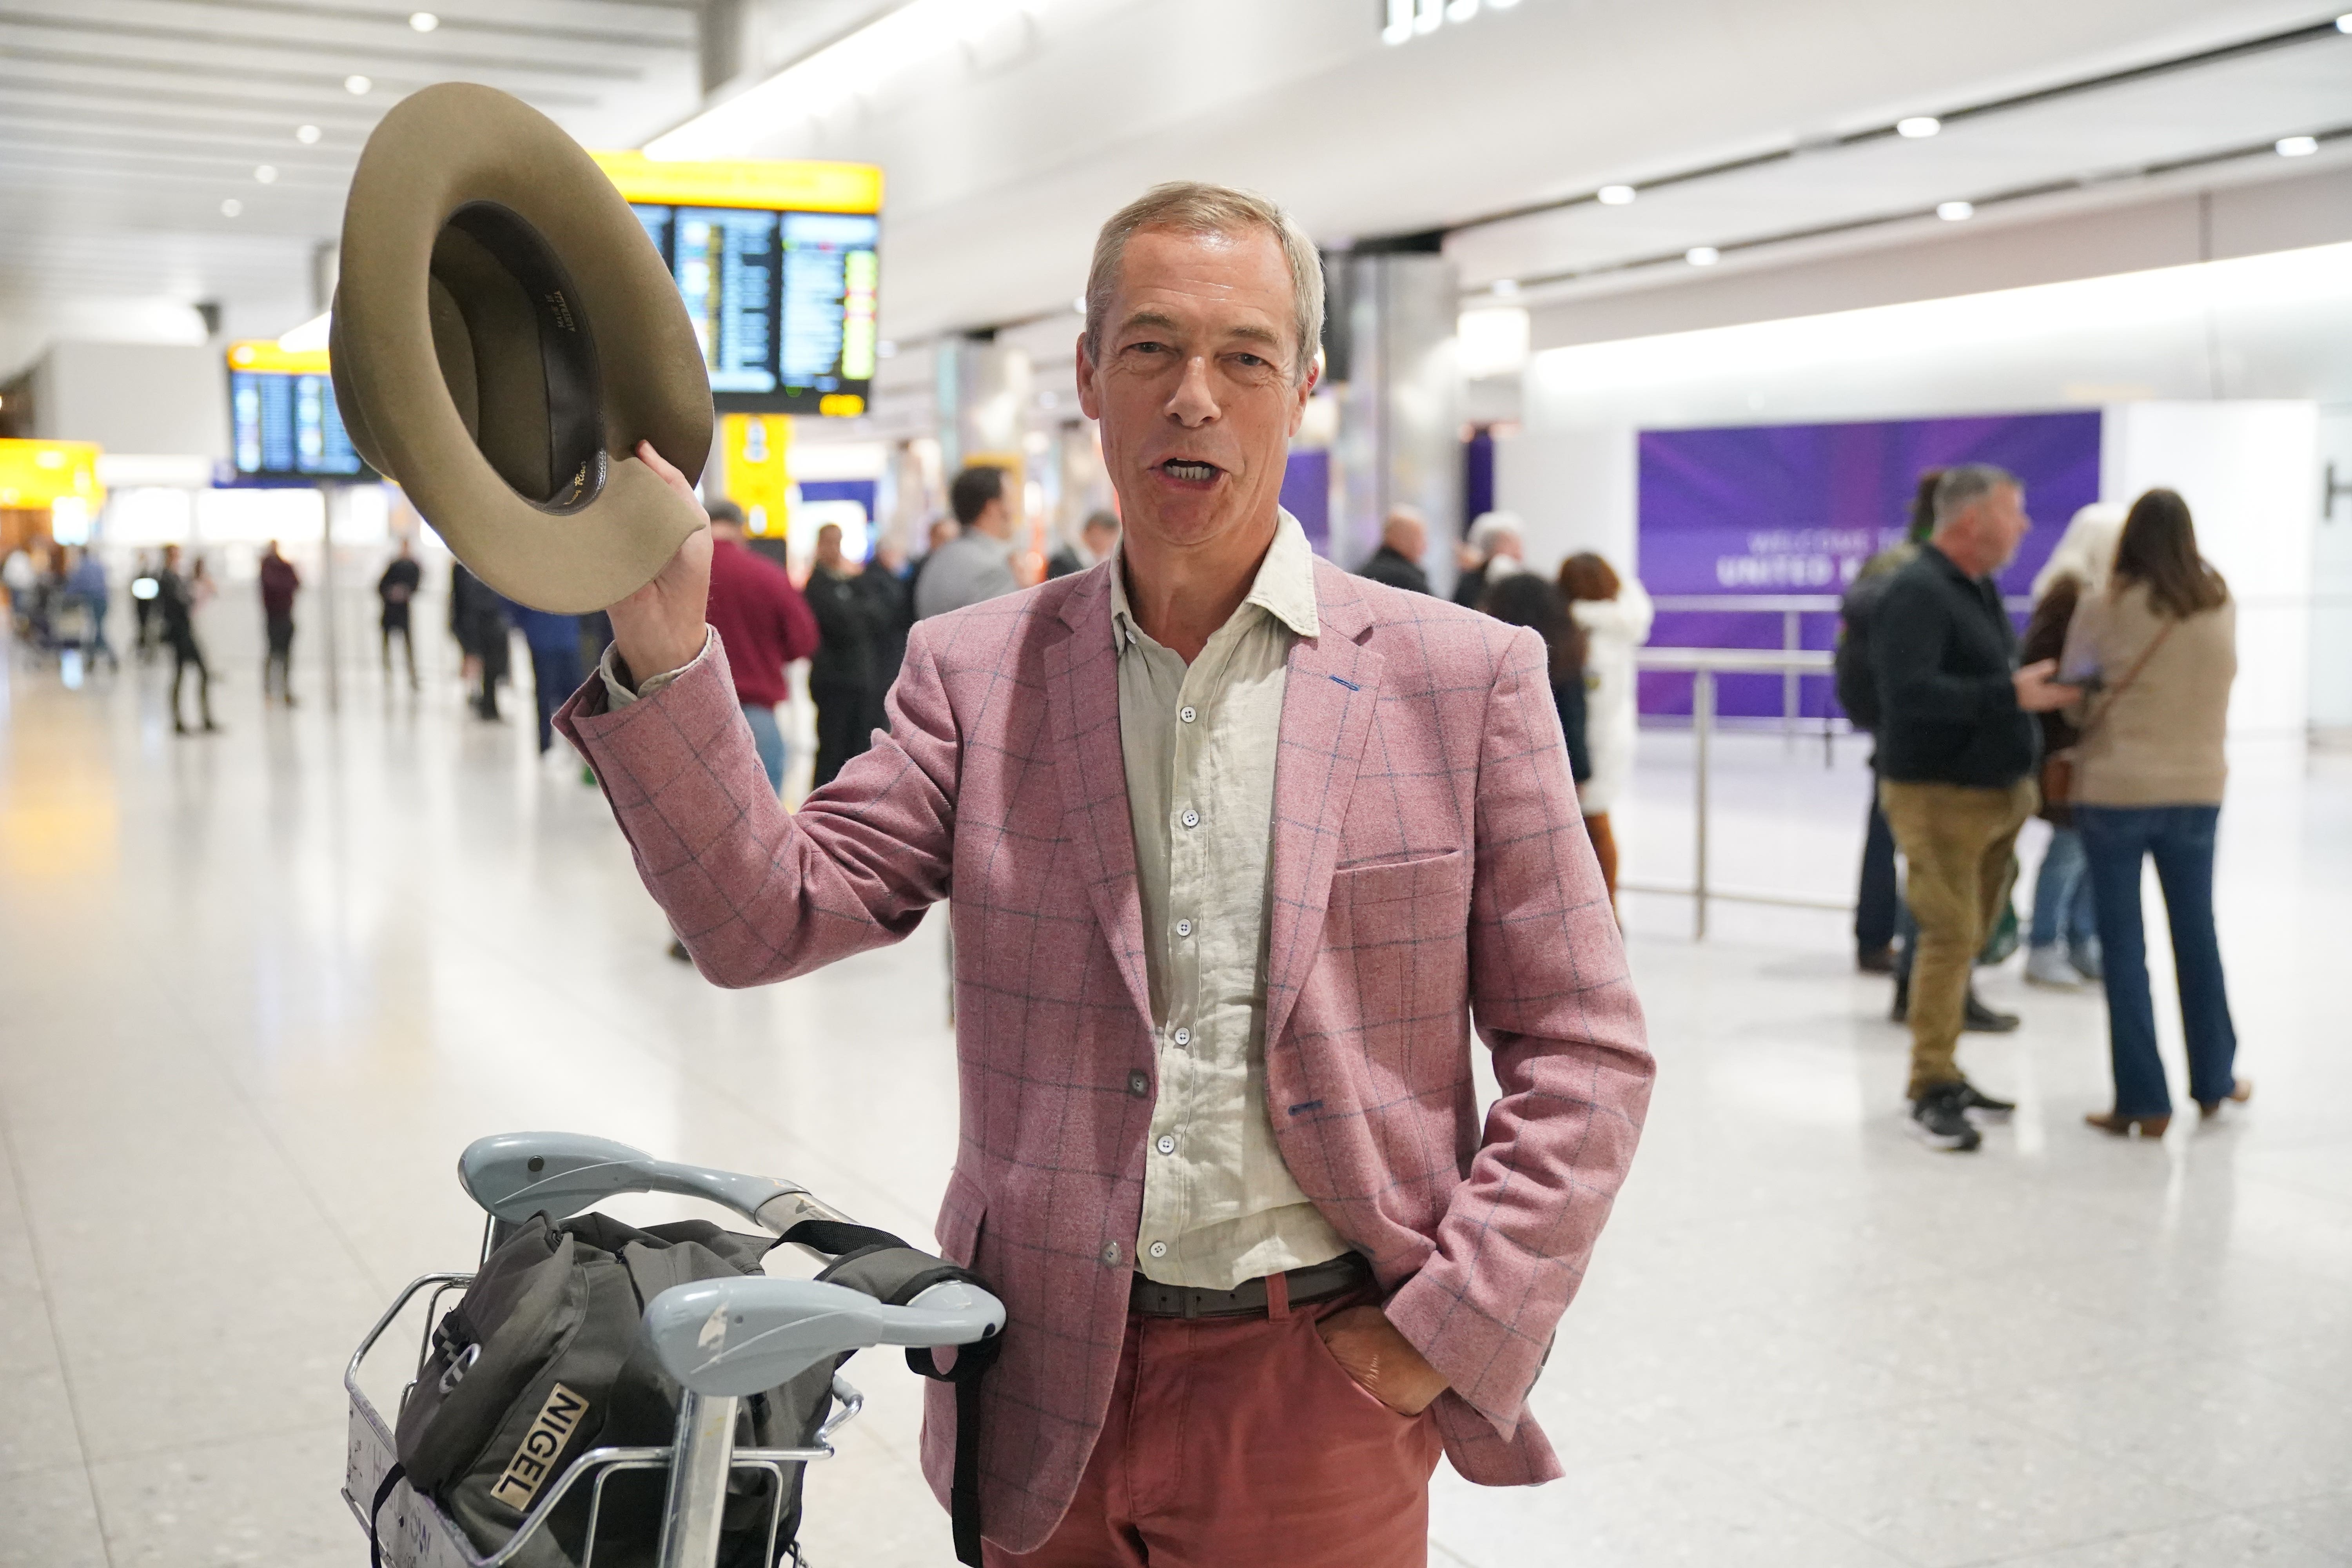 Nigel Farage arrives at Heathrow Airport after taking part in the ITV series